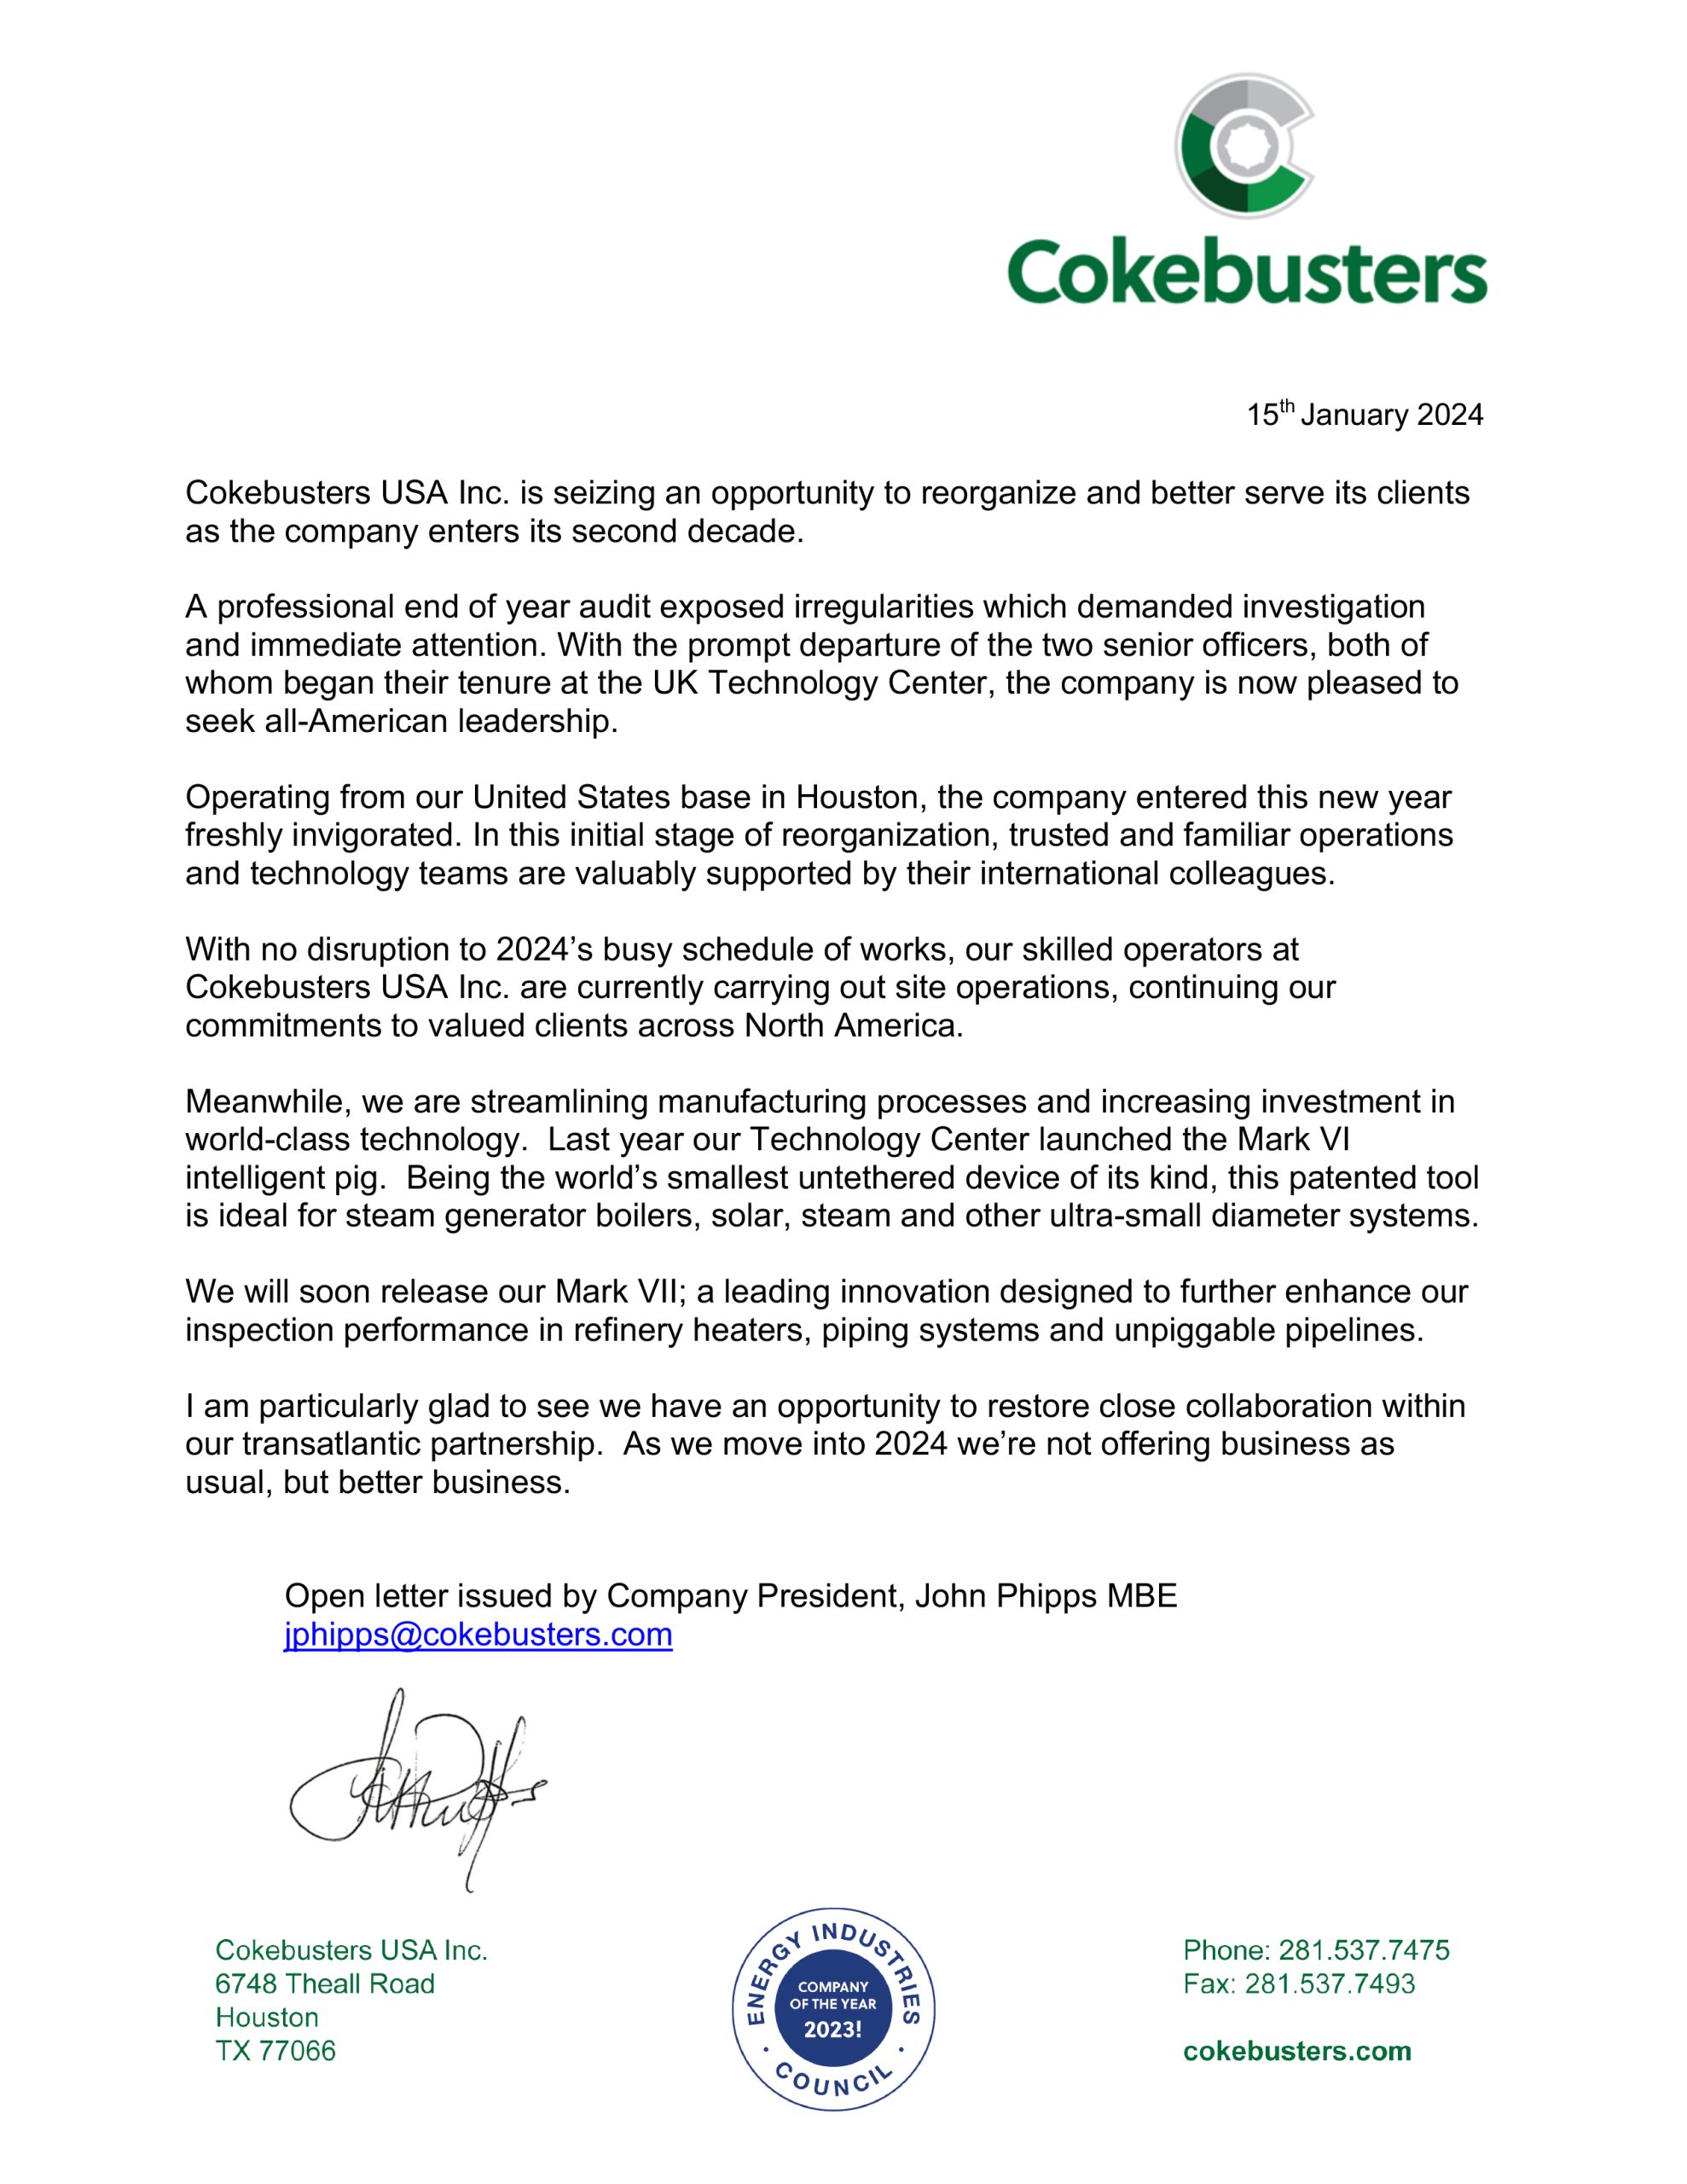 Open letter from the President of Cokebusters USA Inc. 2024